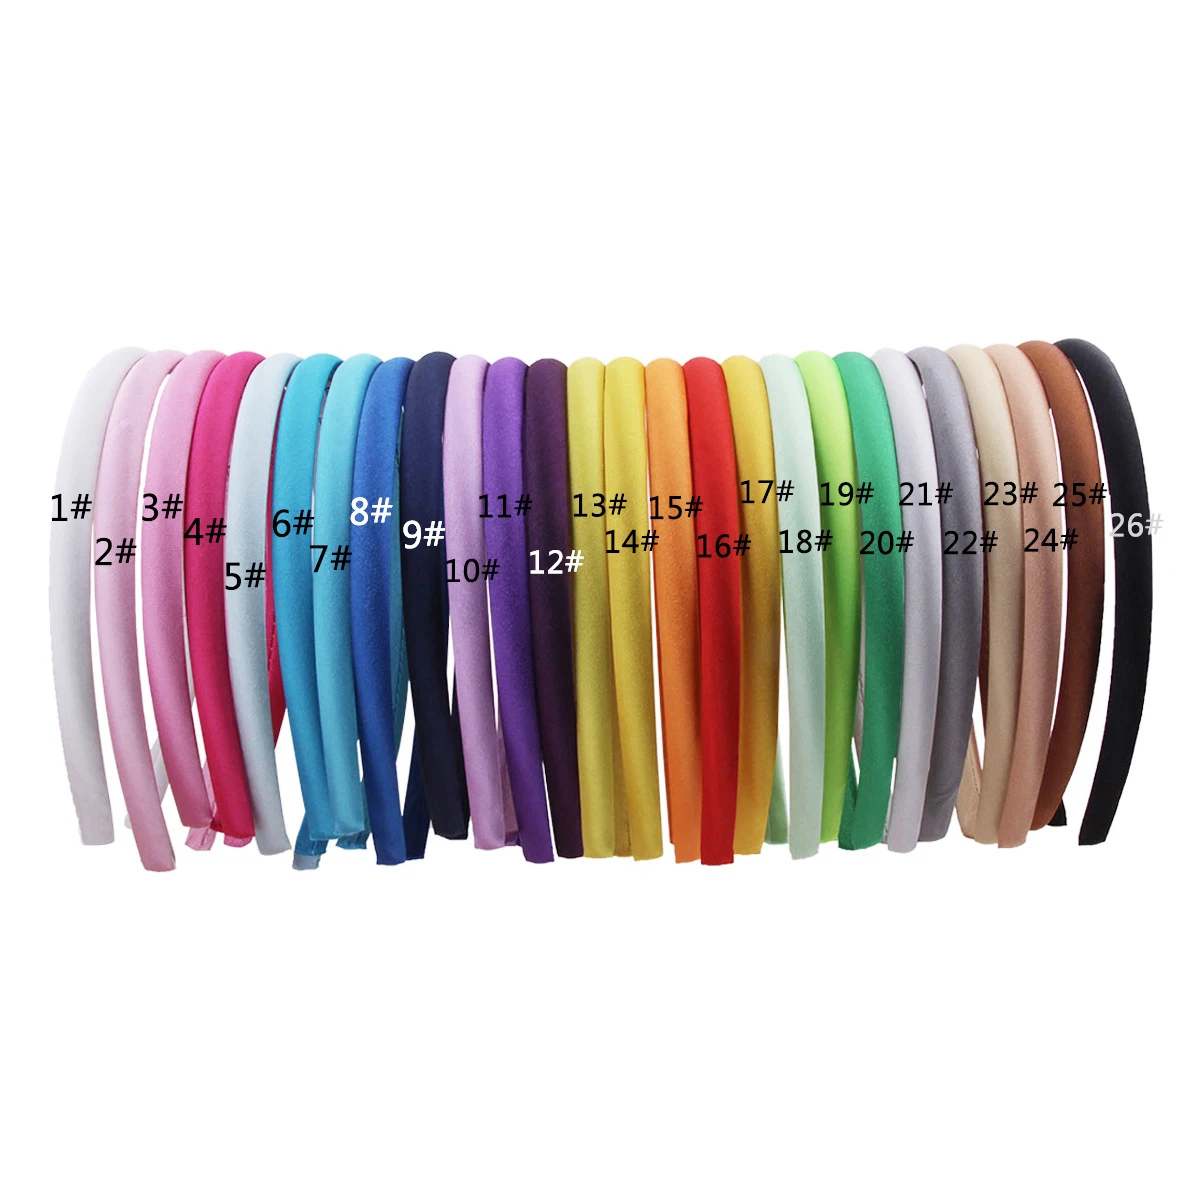 

20 Pcs/lot 20 Colors 10mm Baby Girls Solid Satin Cover Headbands For Kids Children Hard Hairband Hair Accessories